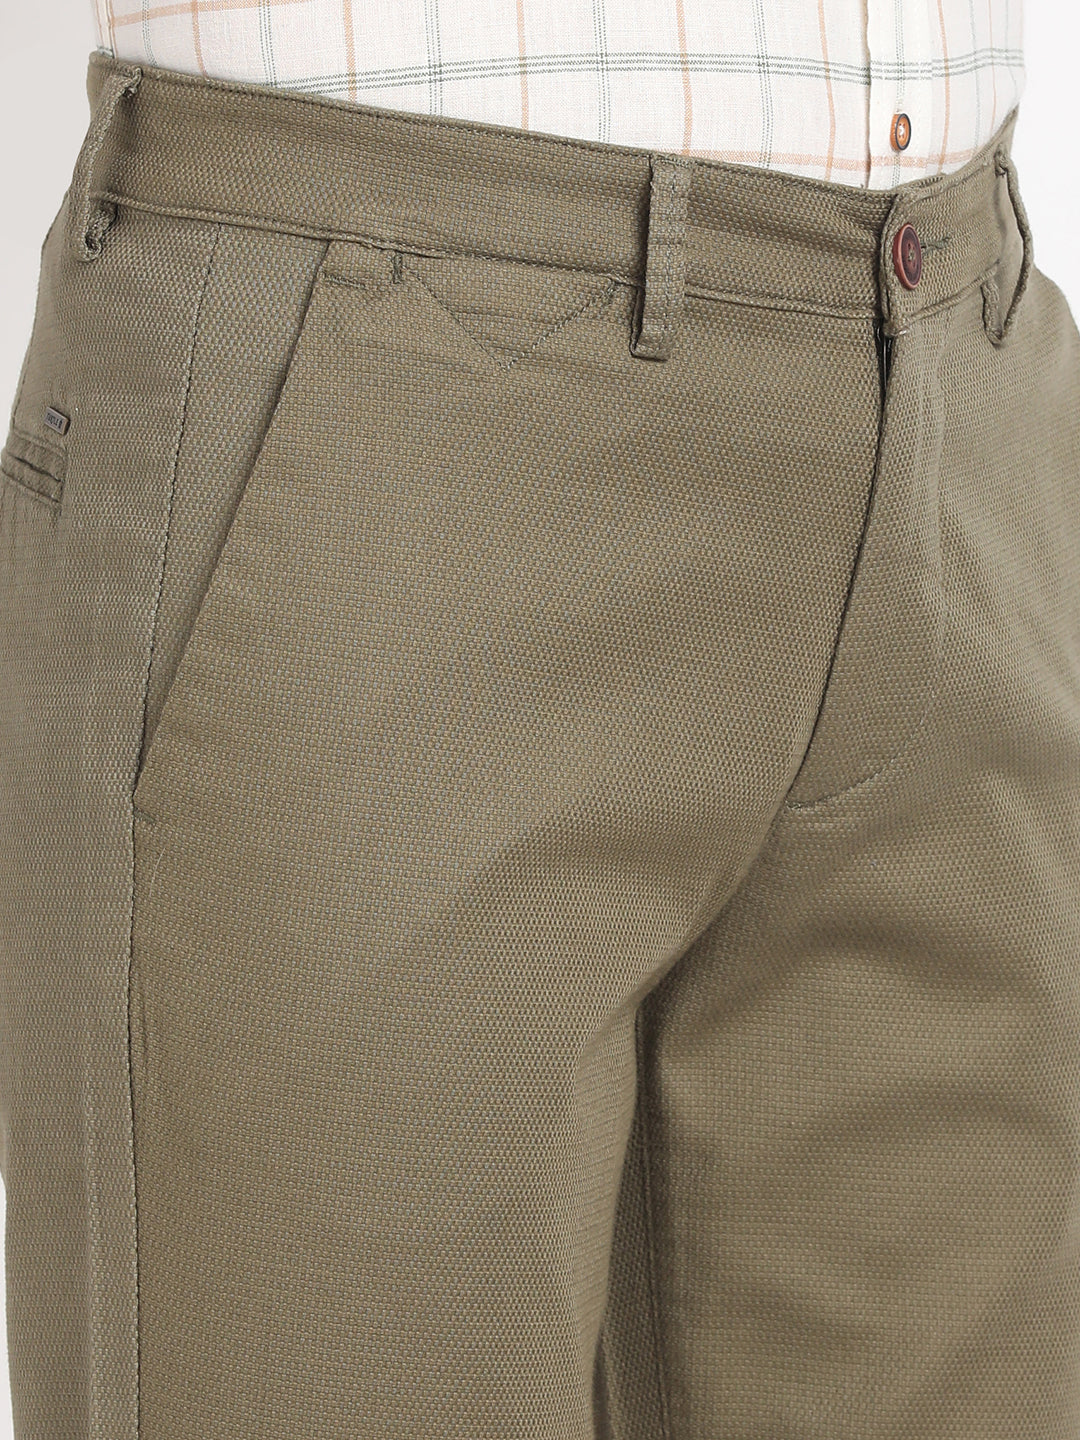 Cotton Stretch Olive Dobby Ultra Slim Fit Flat Front Casual Trouser